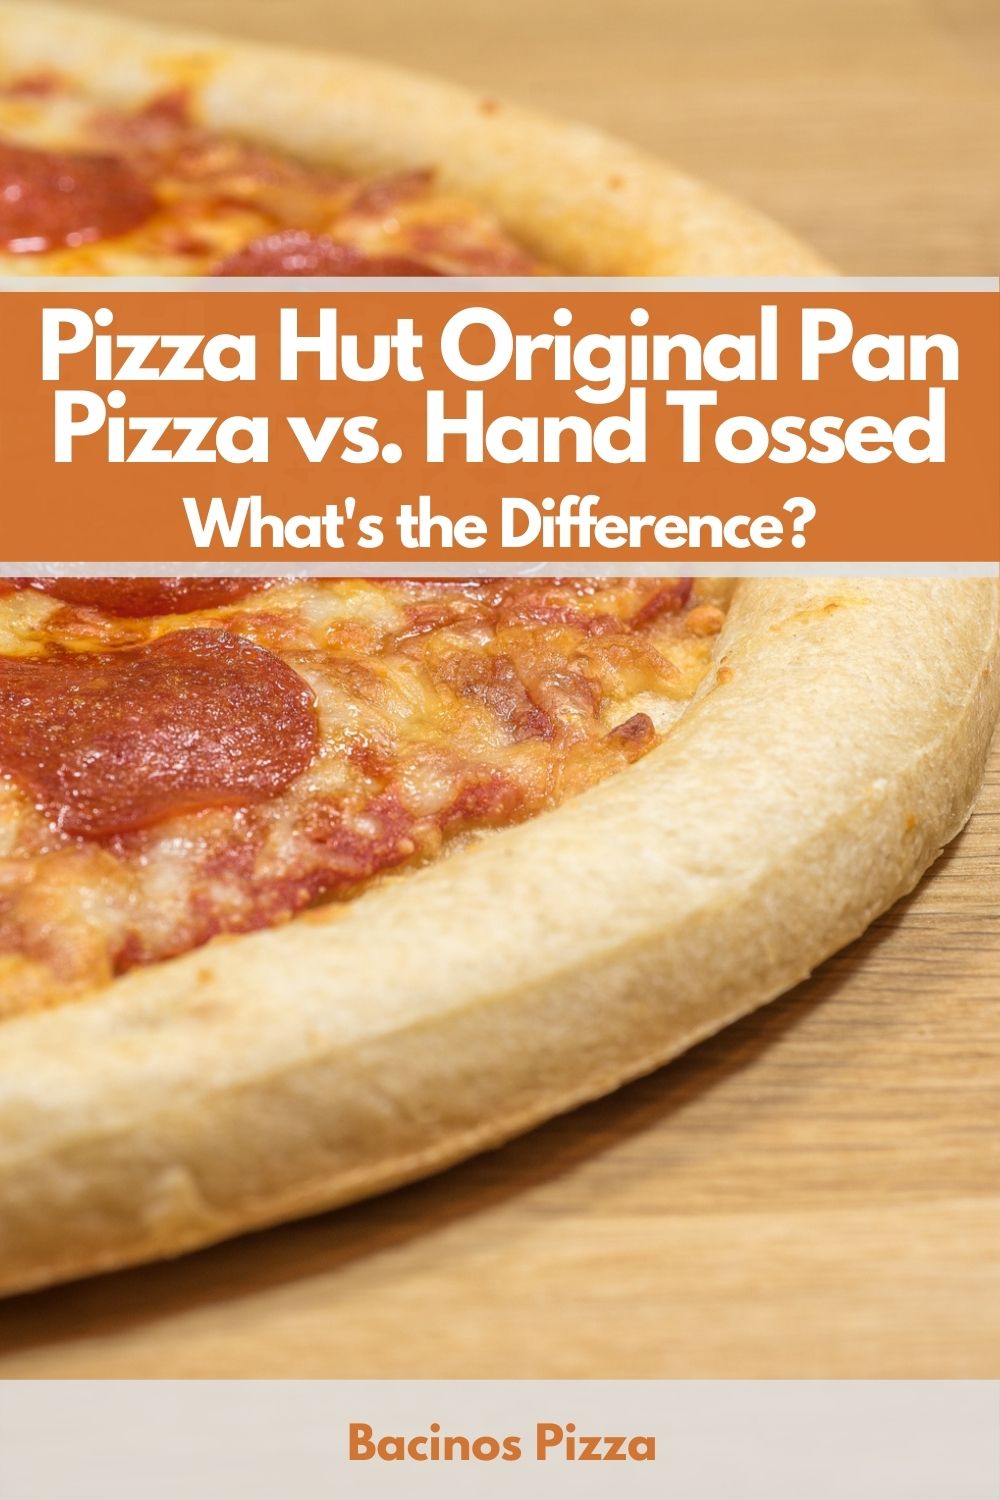 Pizza Hut Original Pan Pizza vs. Hand Tossed What's the Difference pin 2